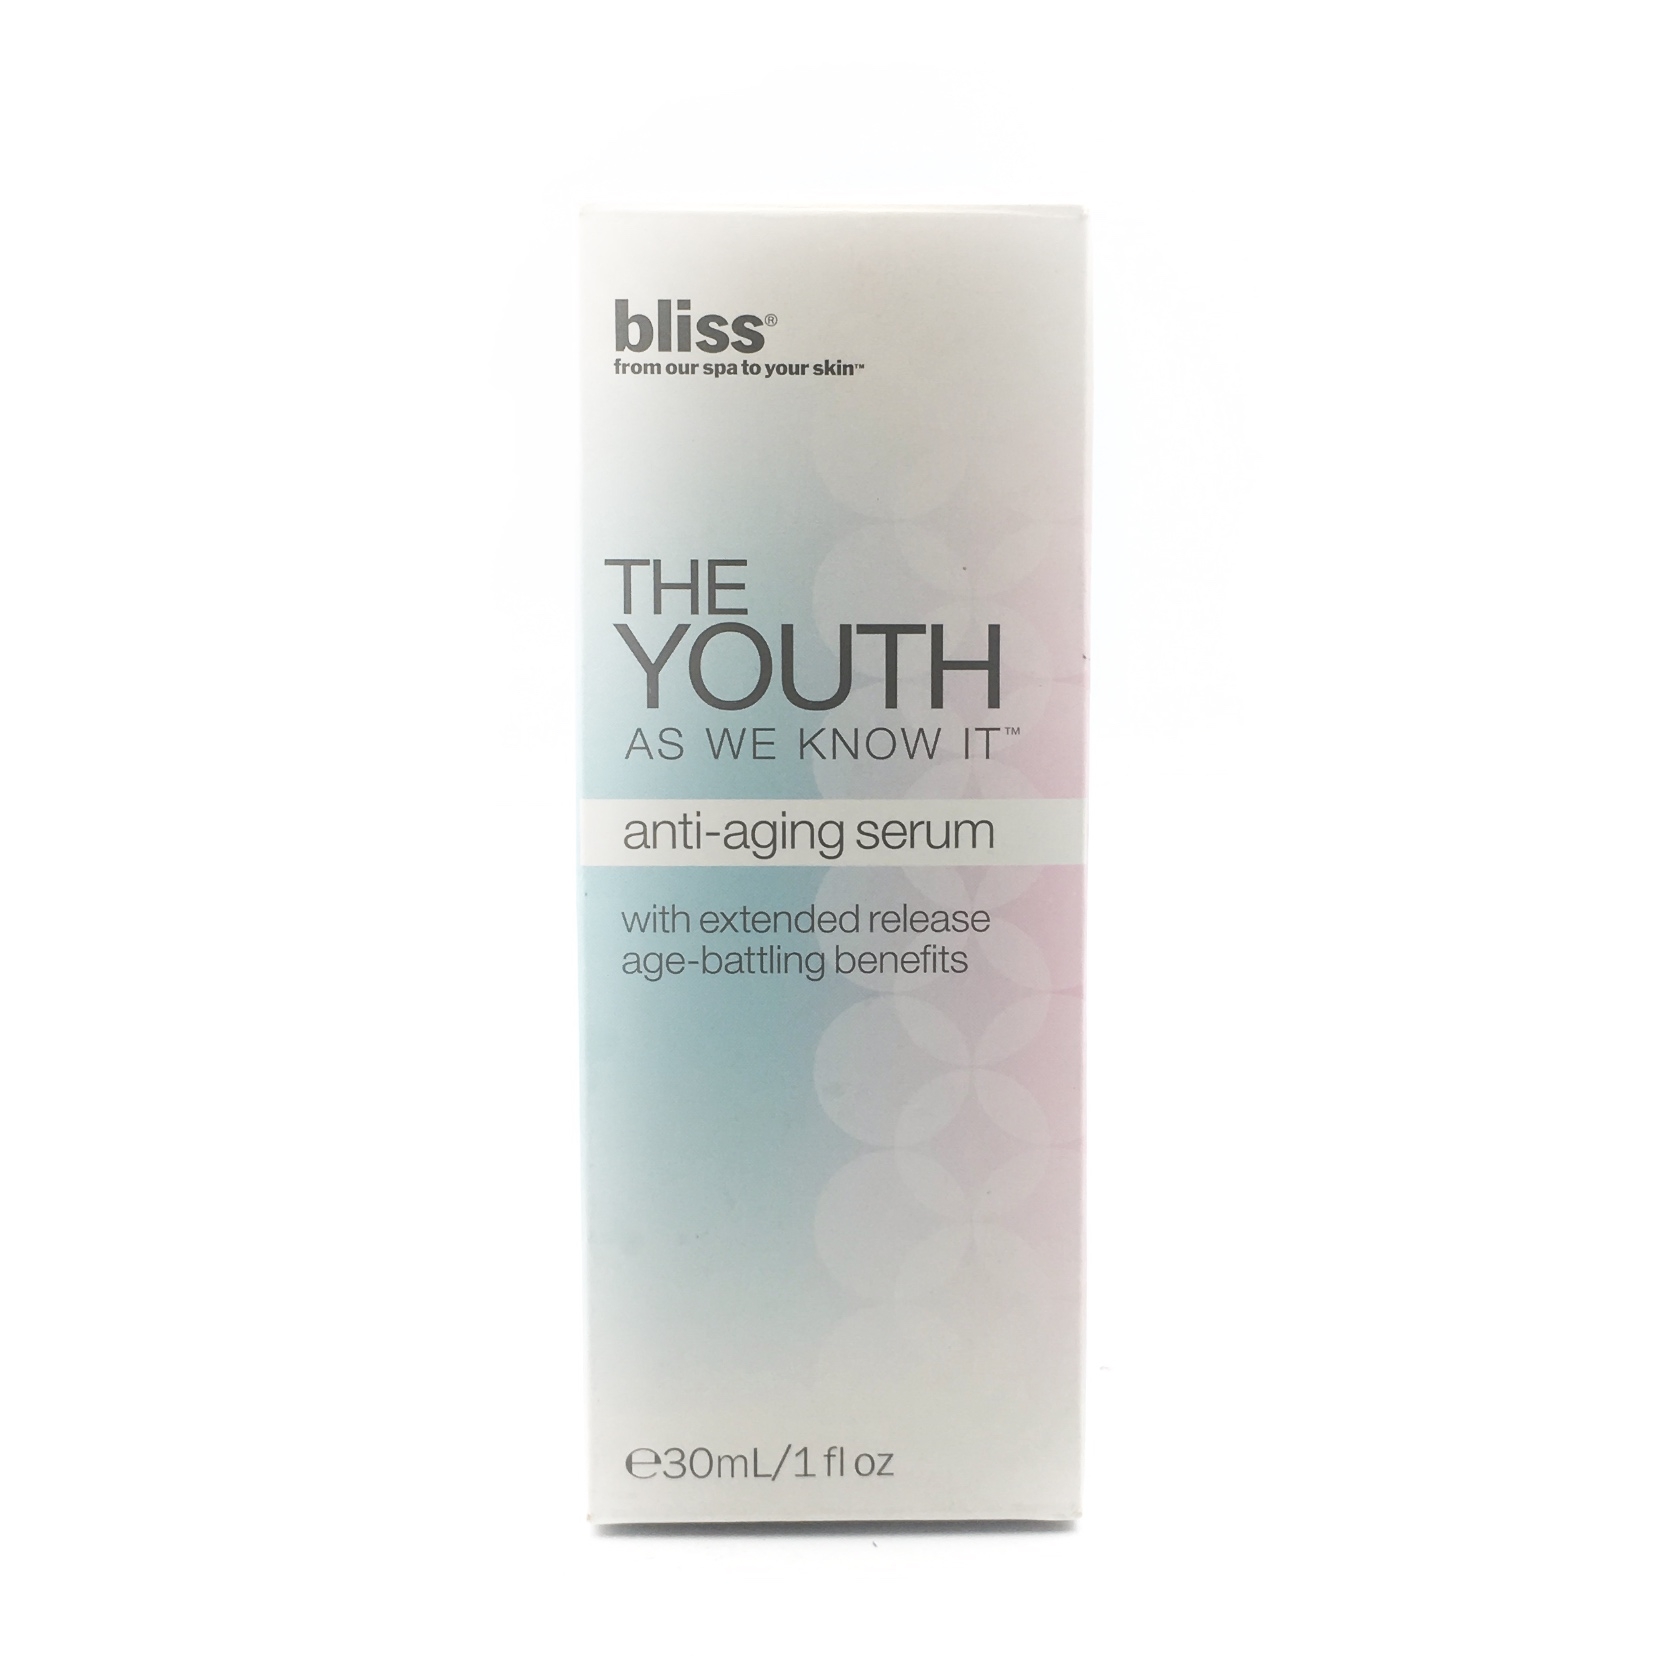 Bliss The Youth As We Know It Anti-Aging Serum Skin Care